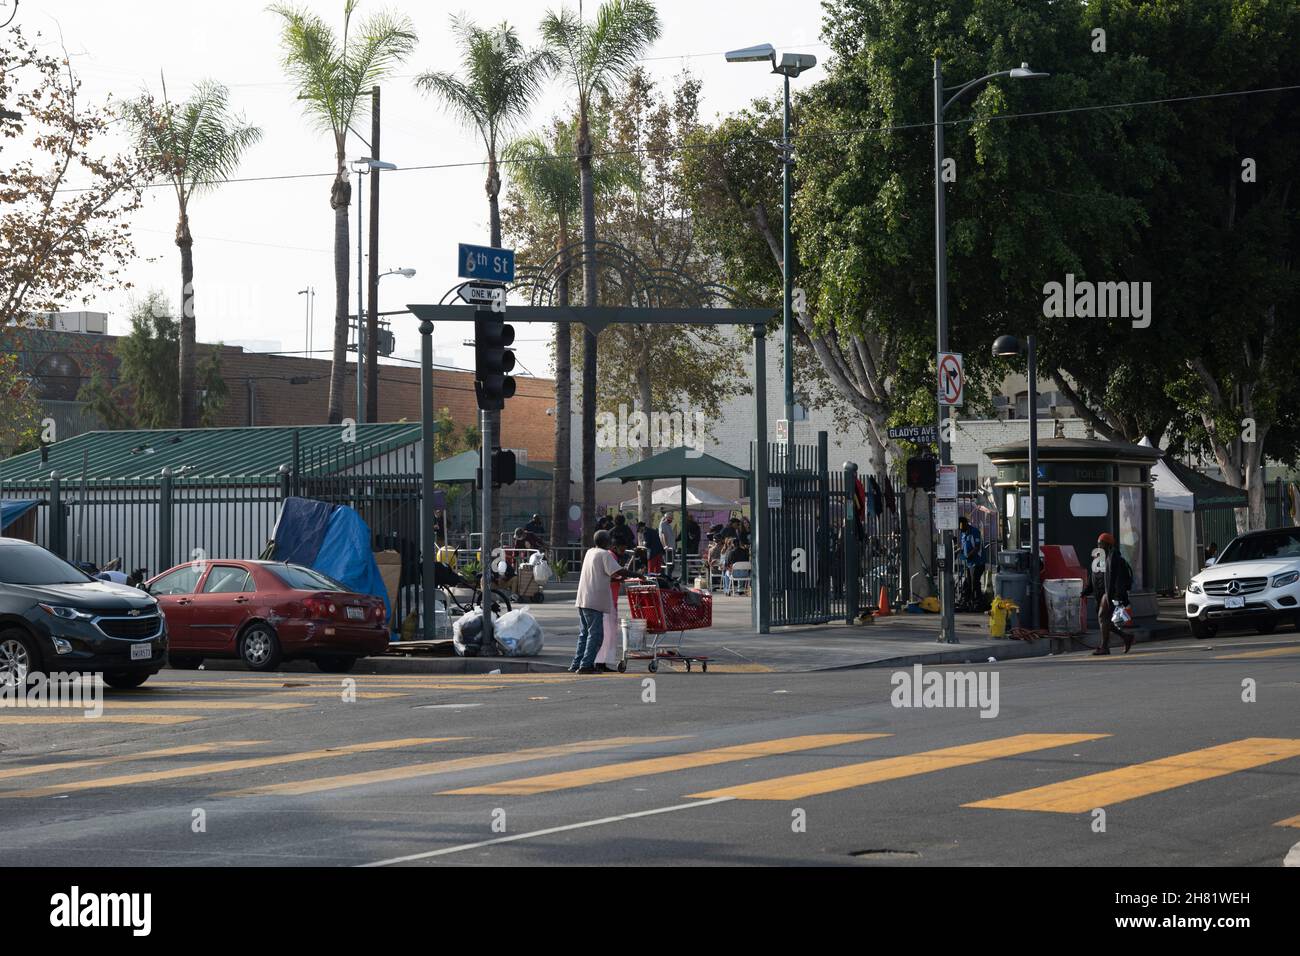 Los Angeles, CA USA - November 20, 2021: Homeless people in Gladys park across from a homeless services center in skid row Stock Photo